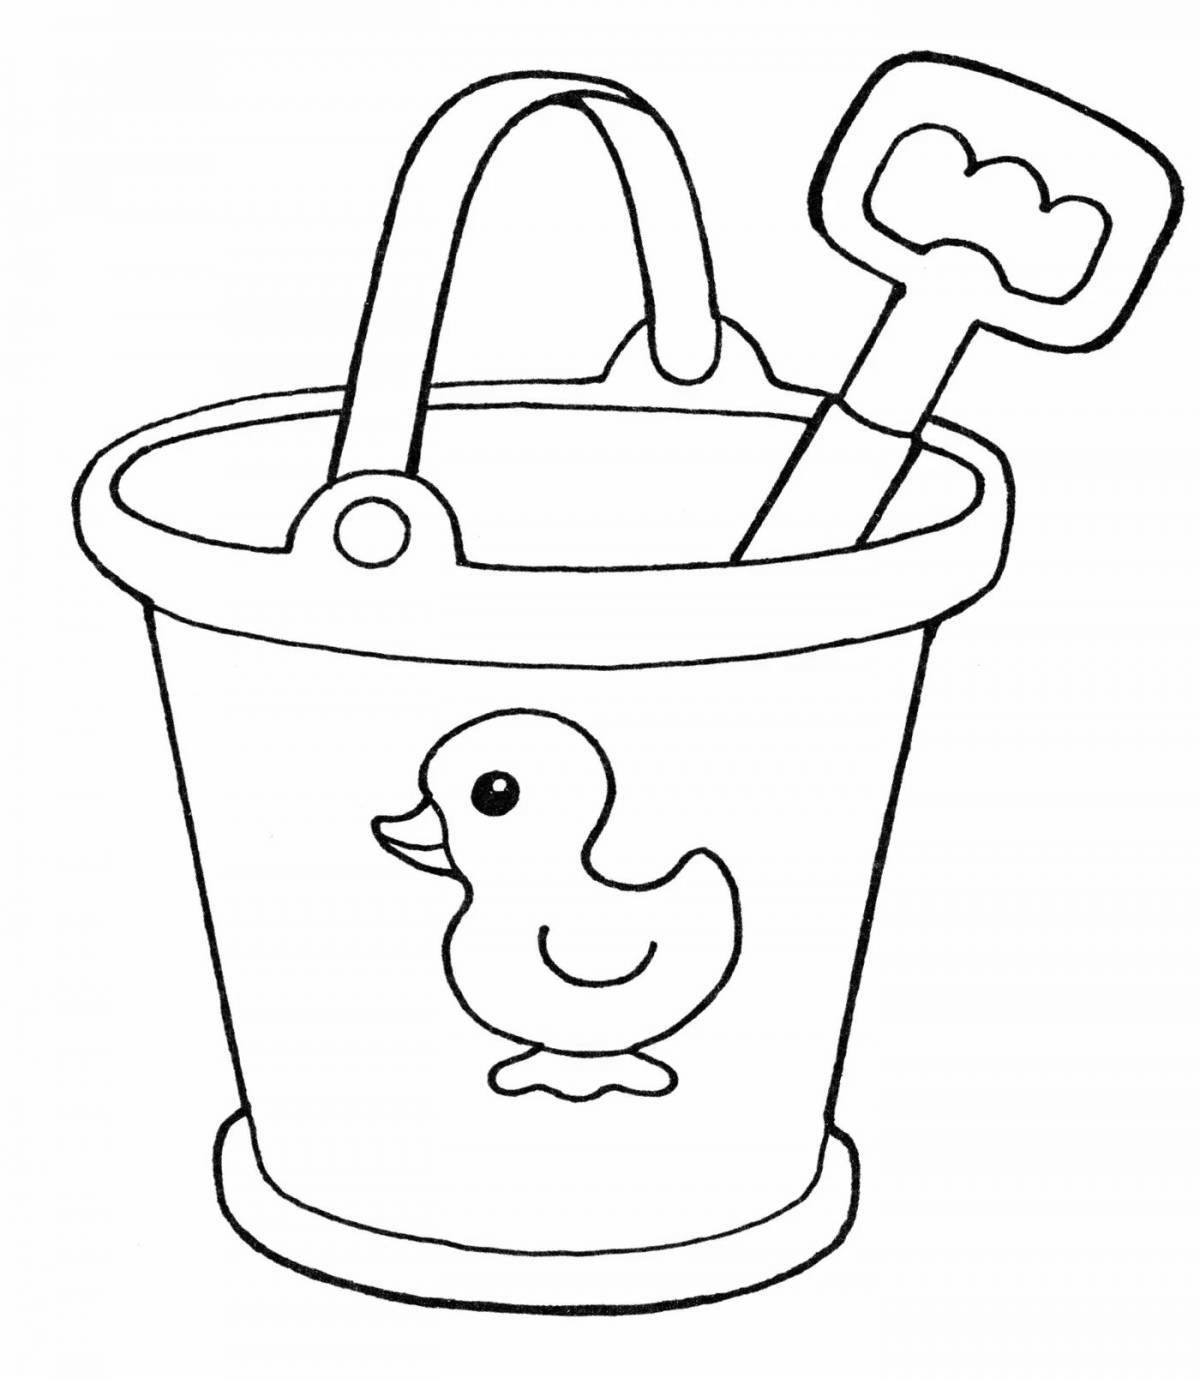 Amazing bucket coloring page